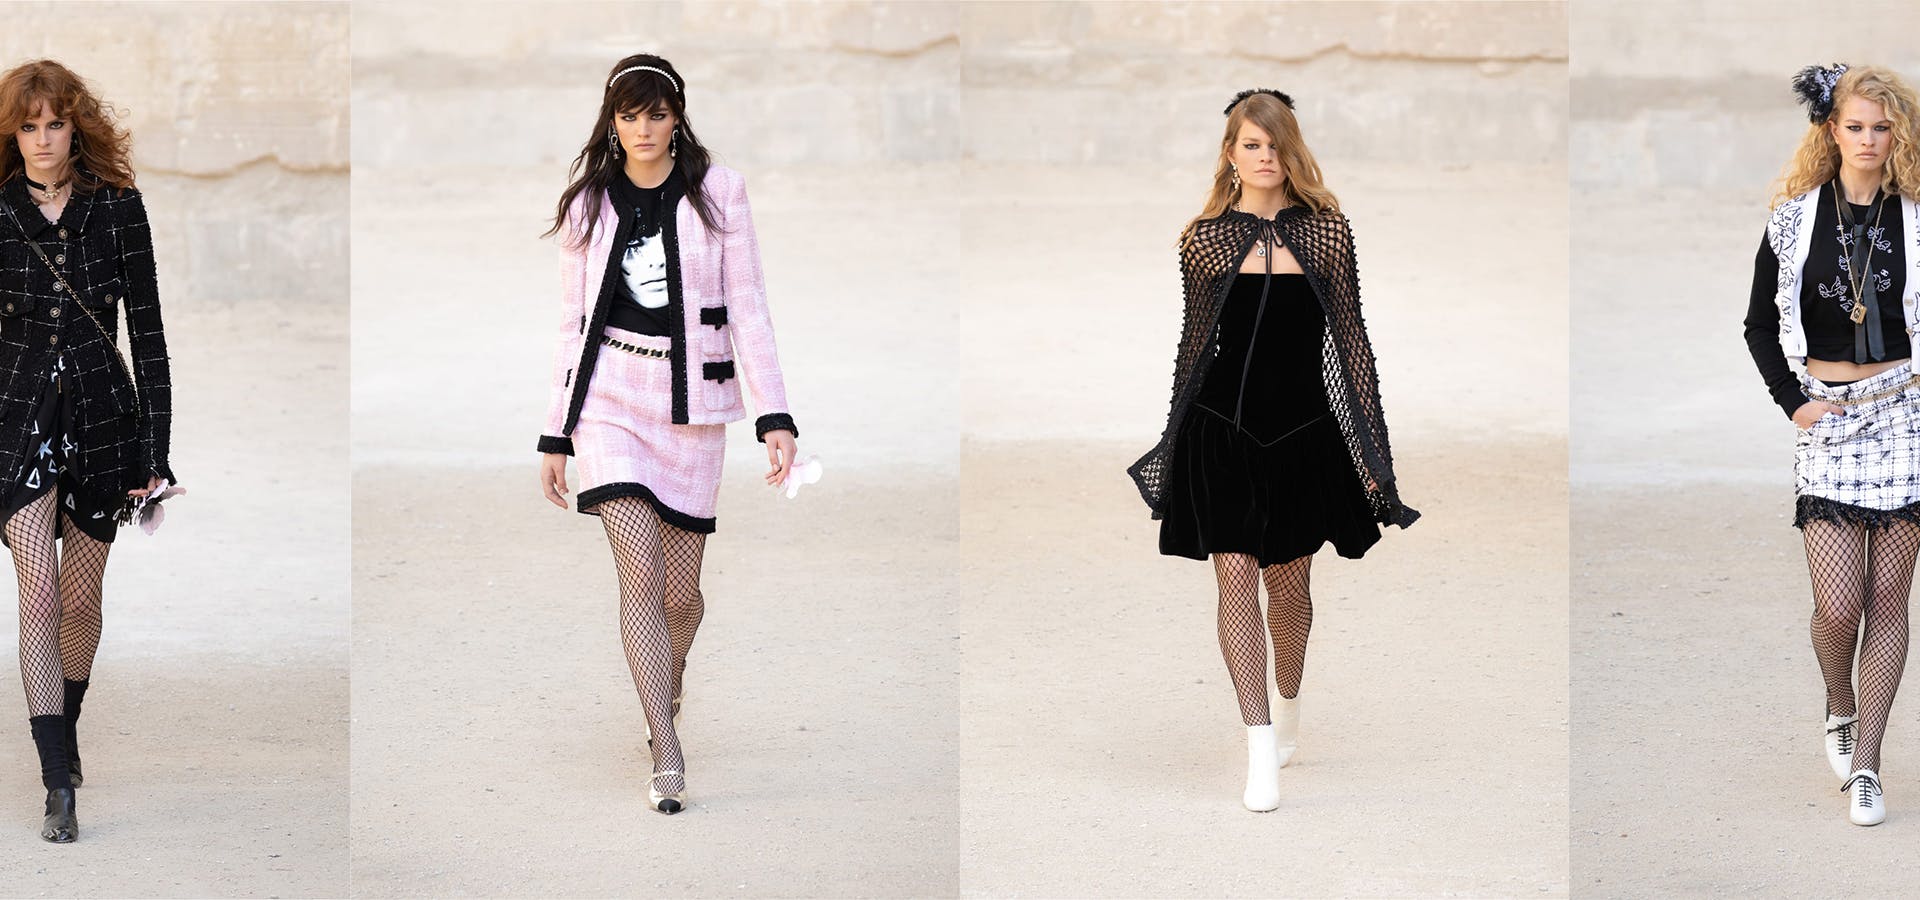 Punk-Chic: Chanel presents its 2021 Cruise Collection with a unique 70s  aesthetic